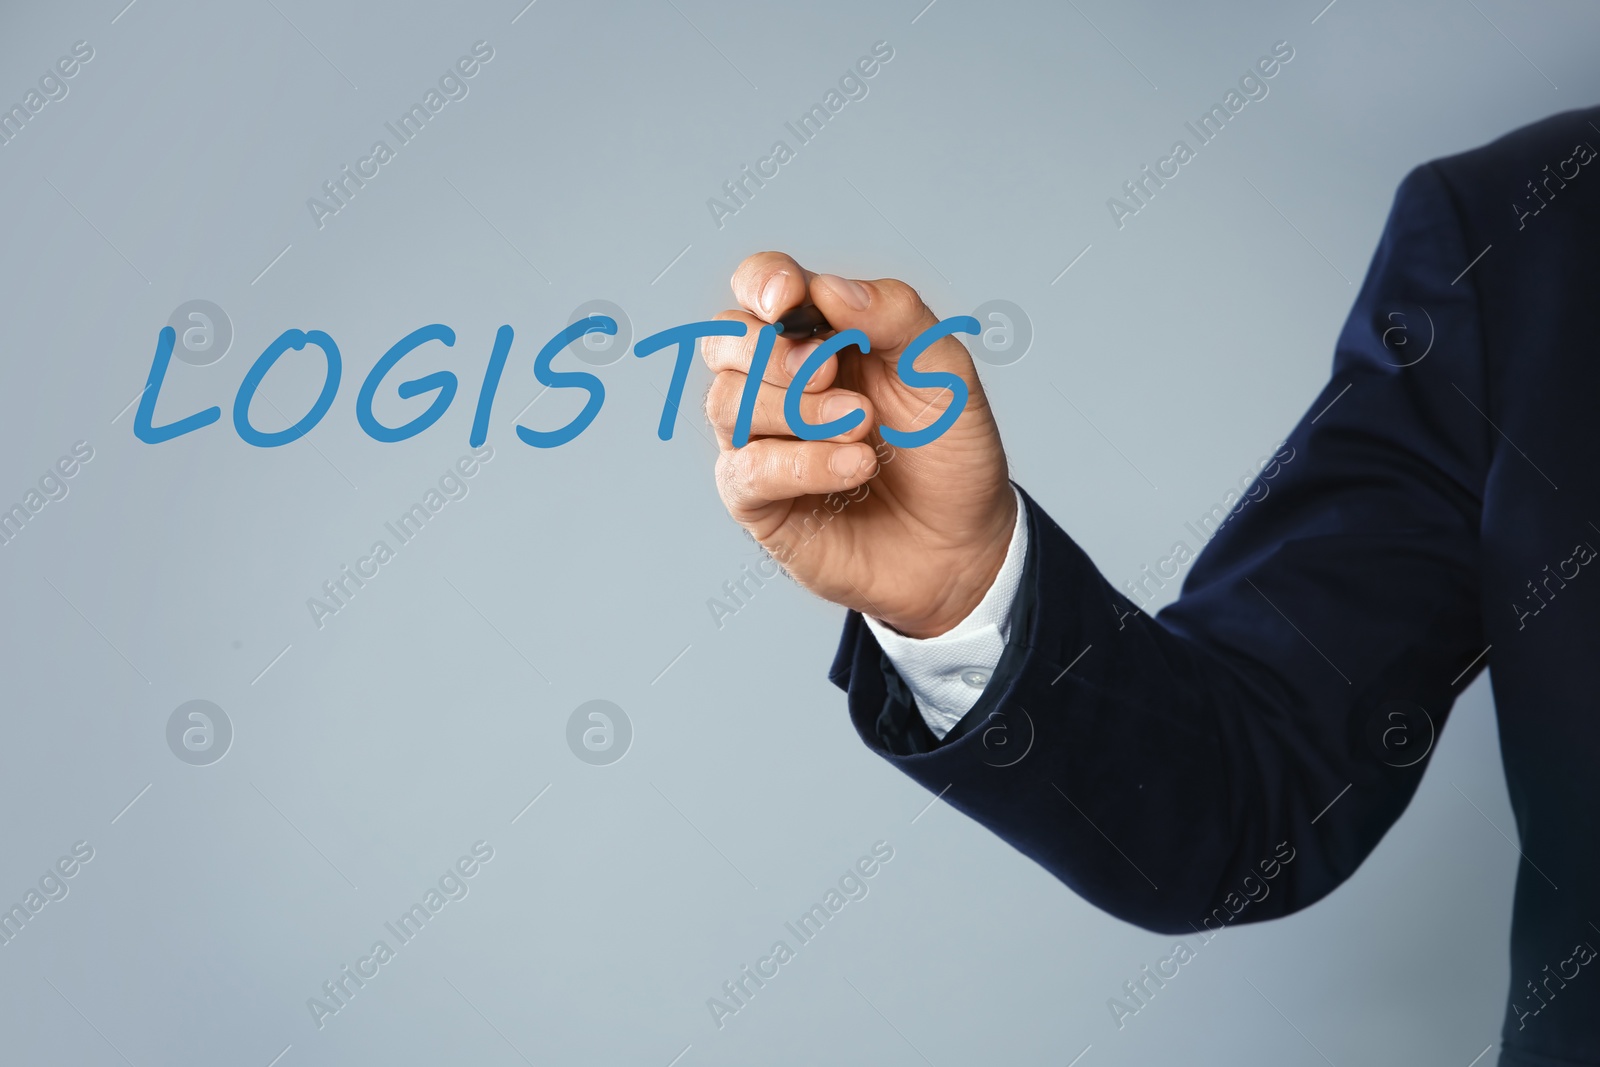 Image of Businessman pointing at word LOGISTICS on virtual screen against light background, closeup 